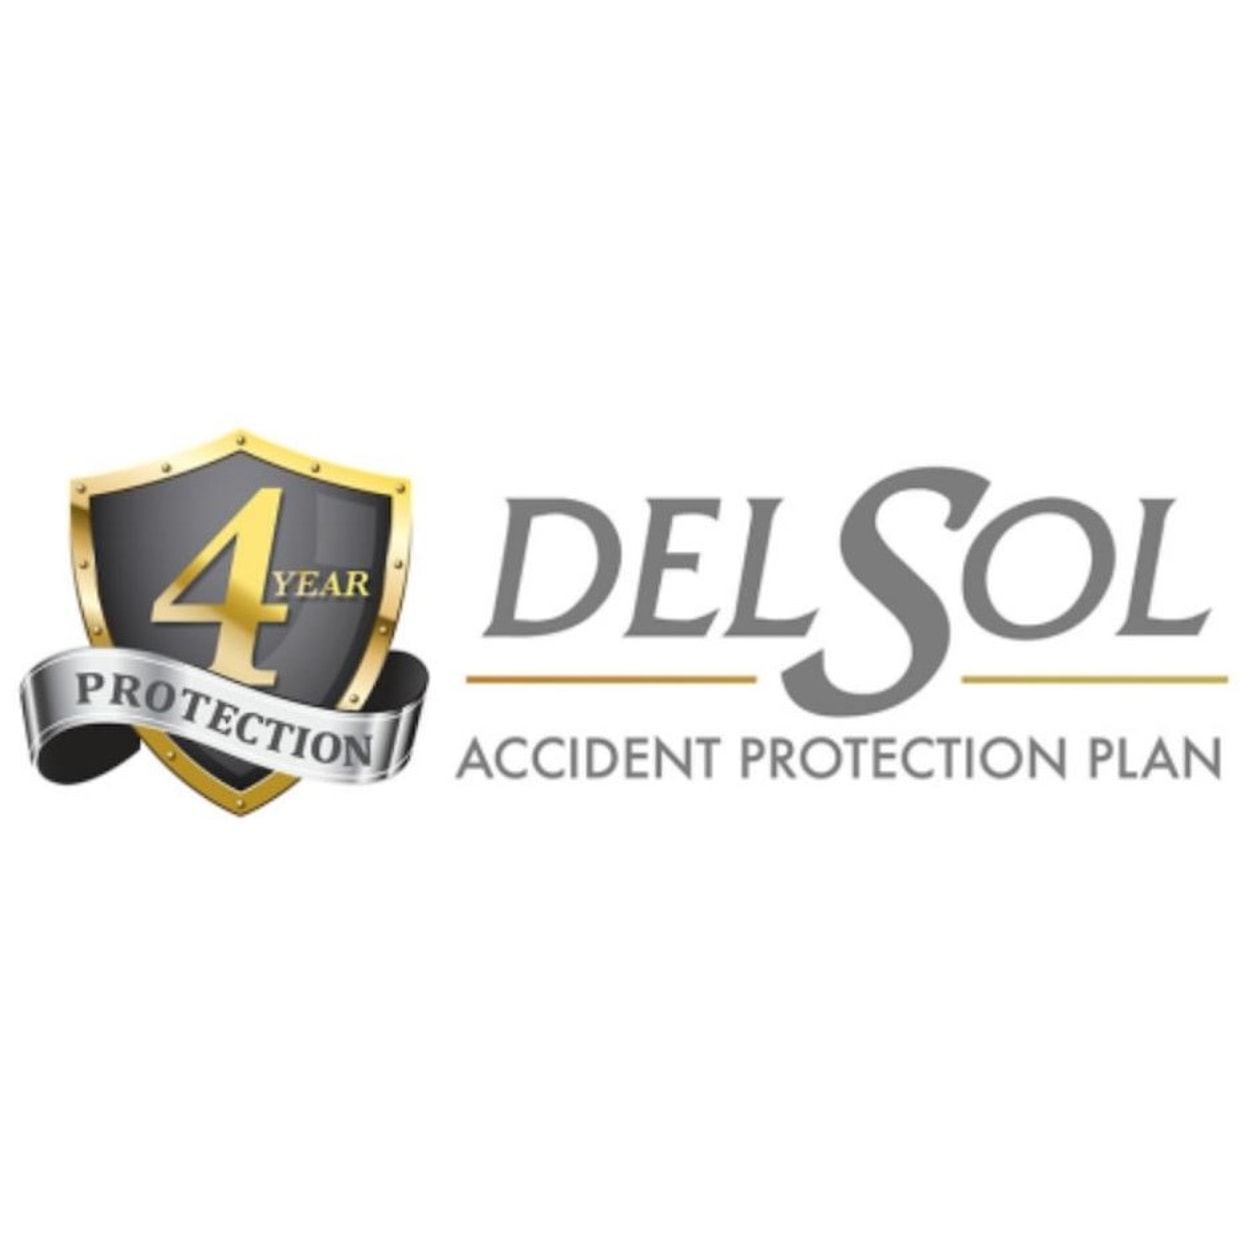 DS Del Sol Protection Plan 4YR Protection Plan $601 to $750